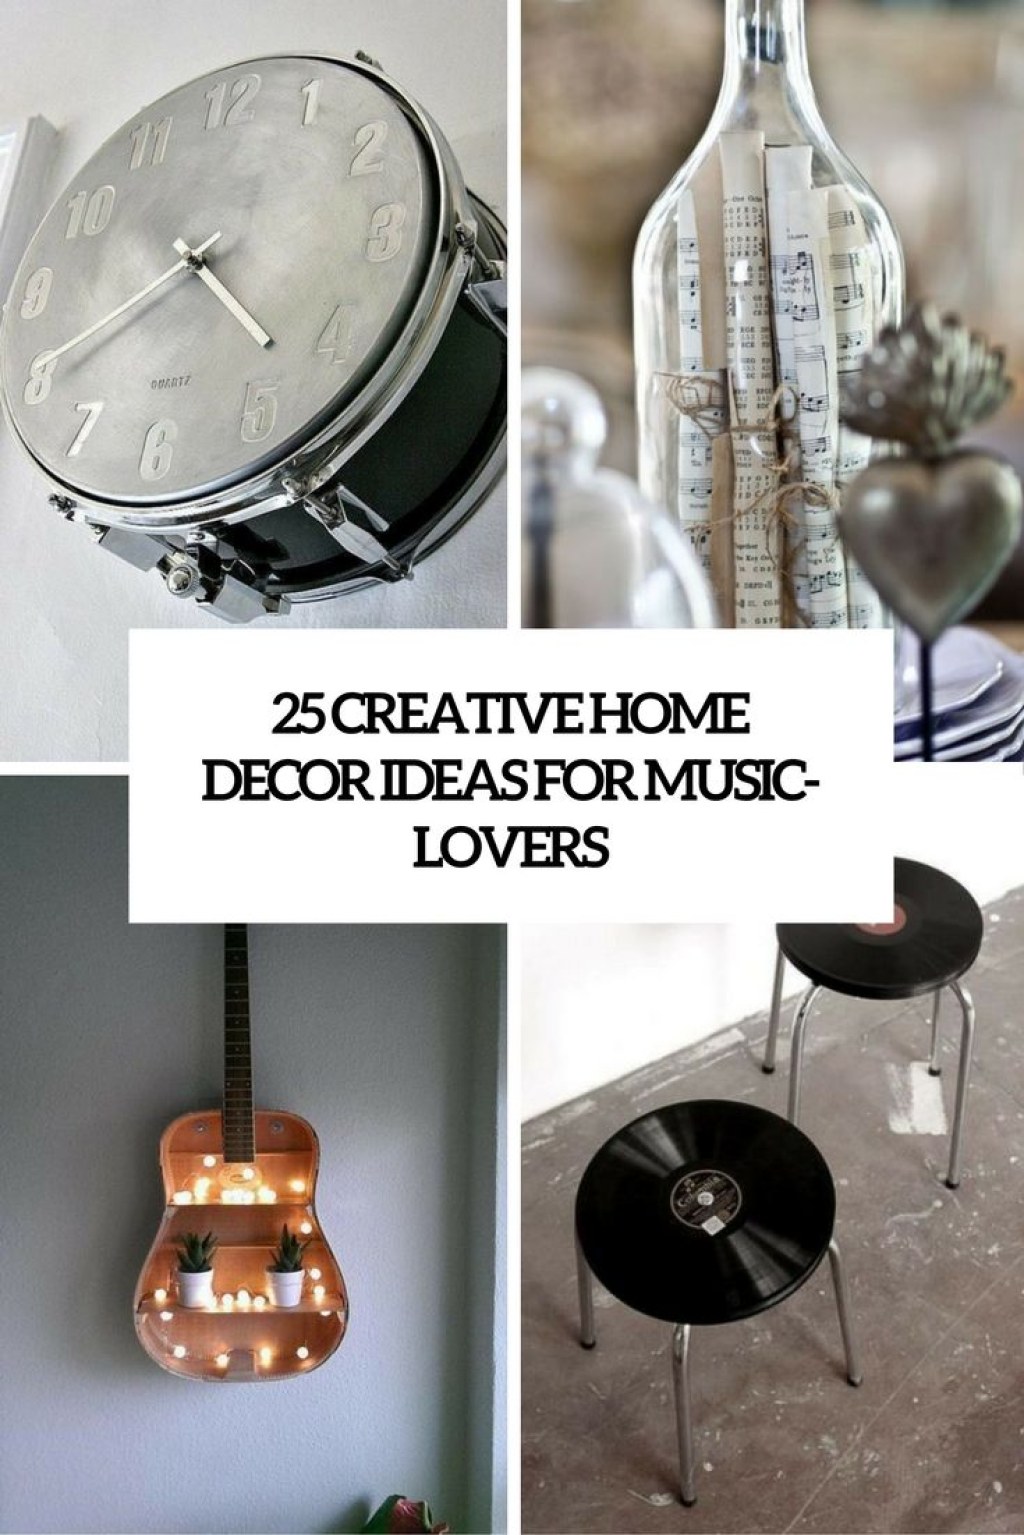 creative music decor - creative home decor ideas for music-lovers cover - Shelterness